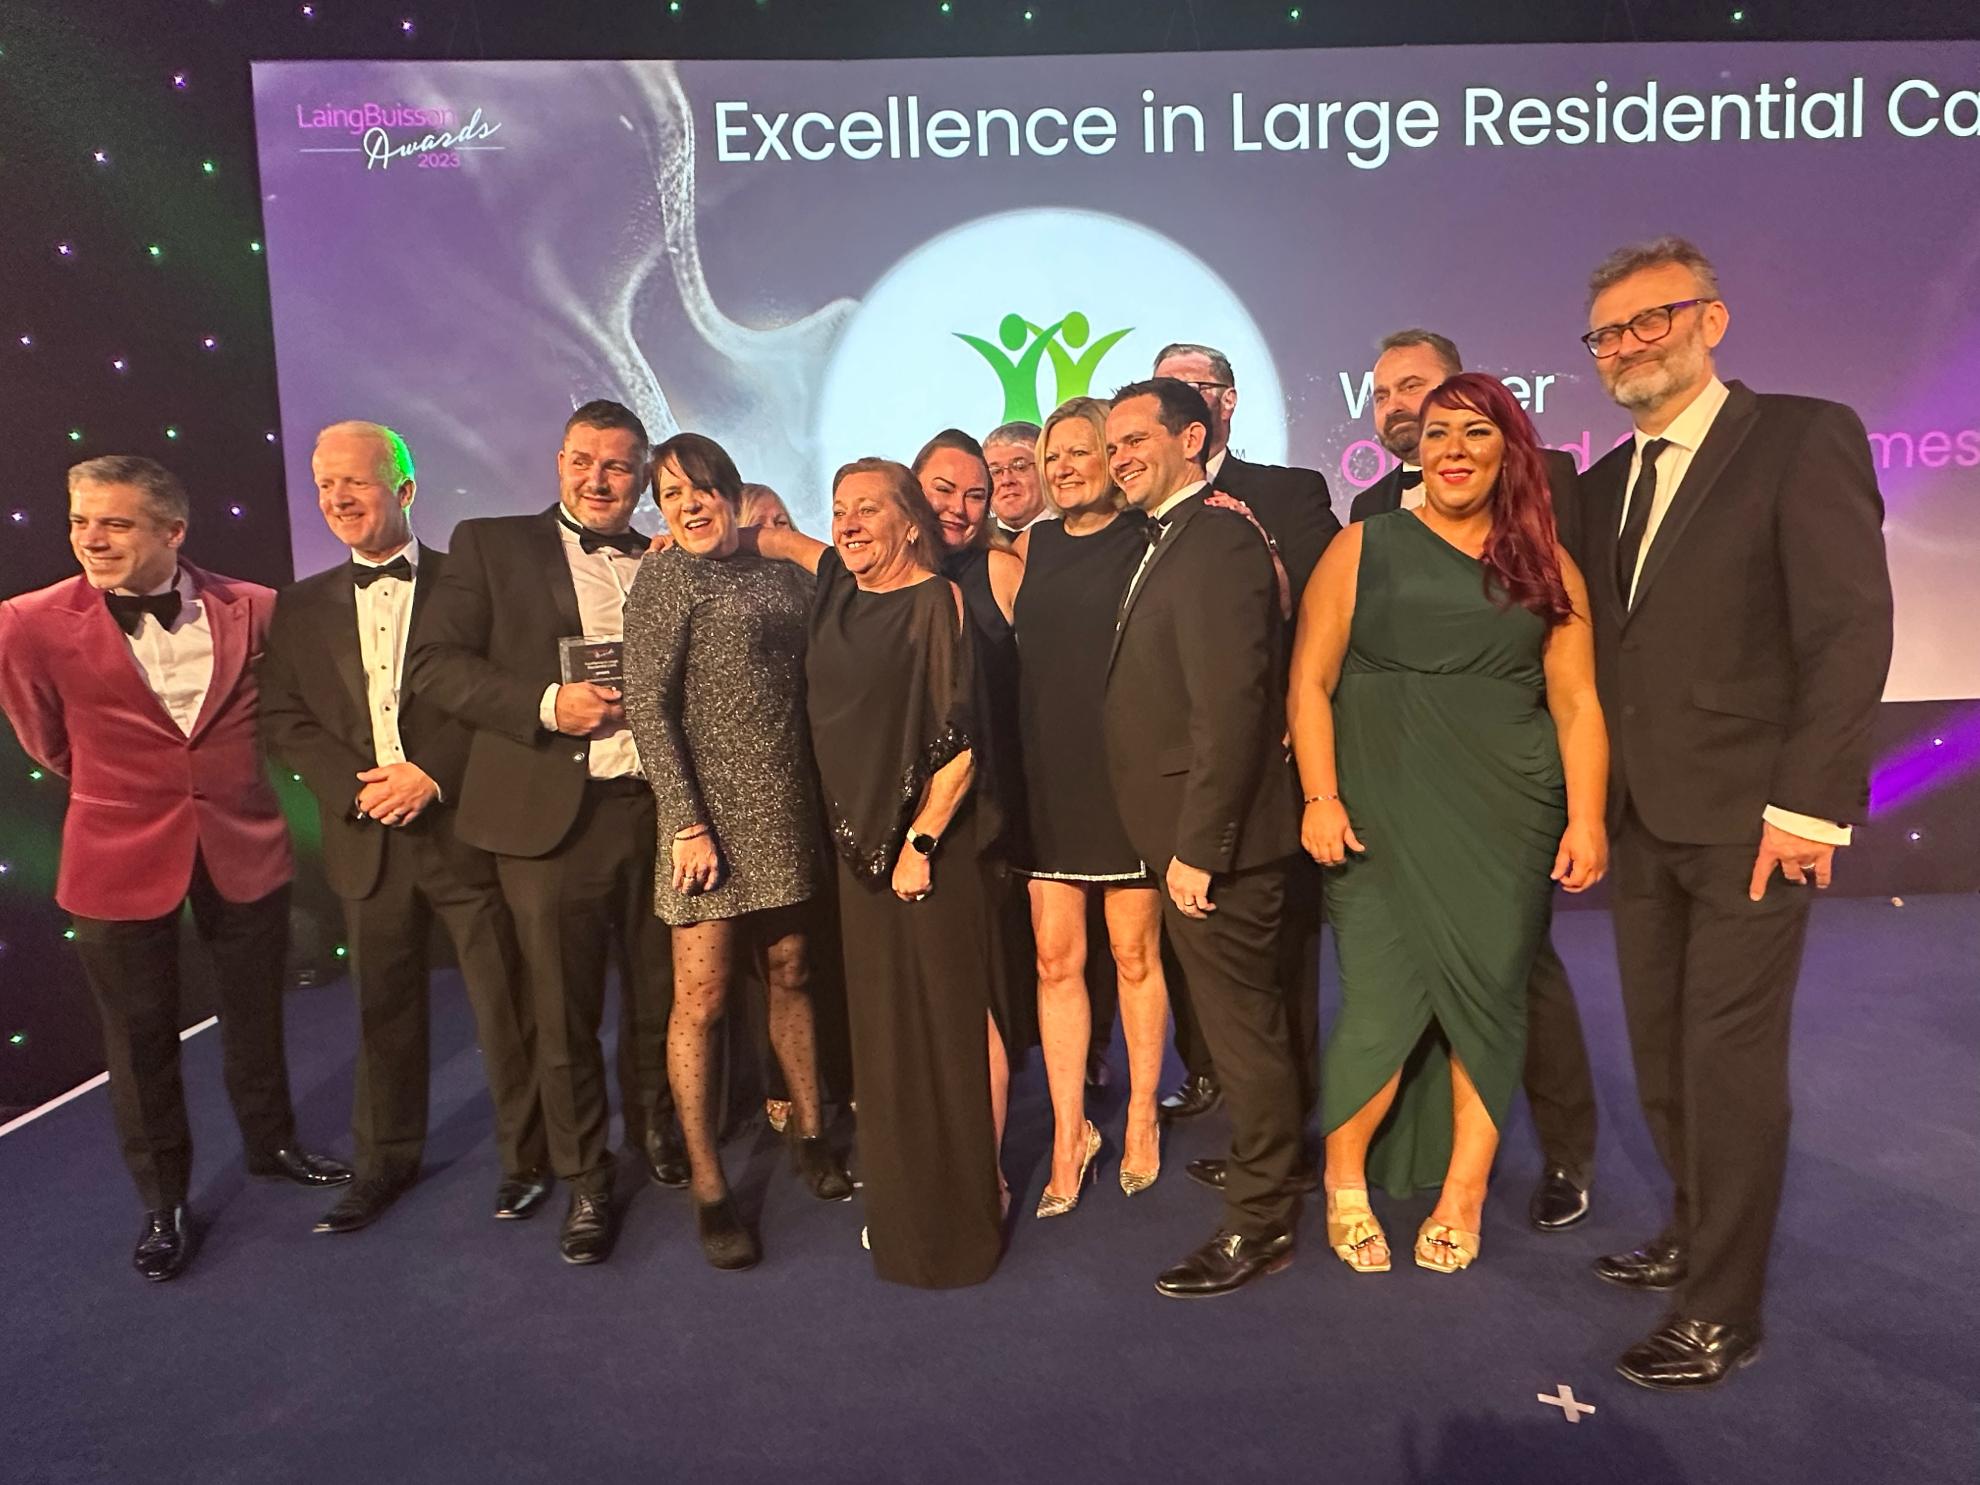 Orchard Care Homes are winners of the Excellence in Large Residential Care Award at the LaingBuisson Awards 2023